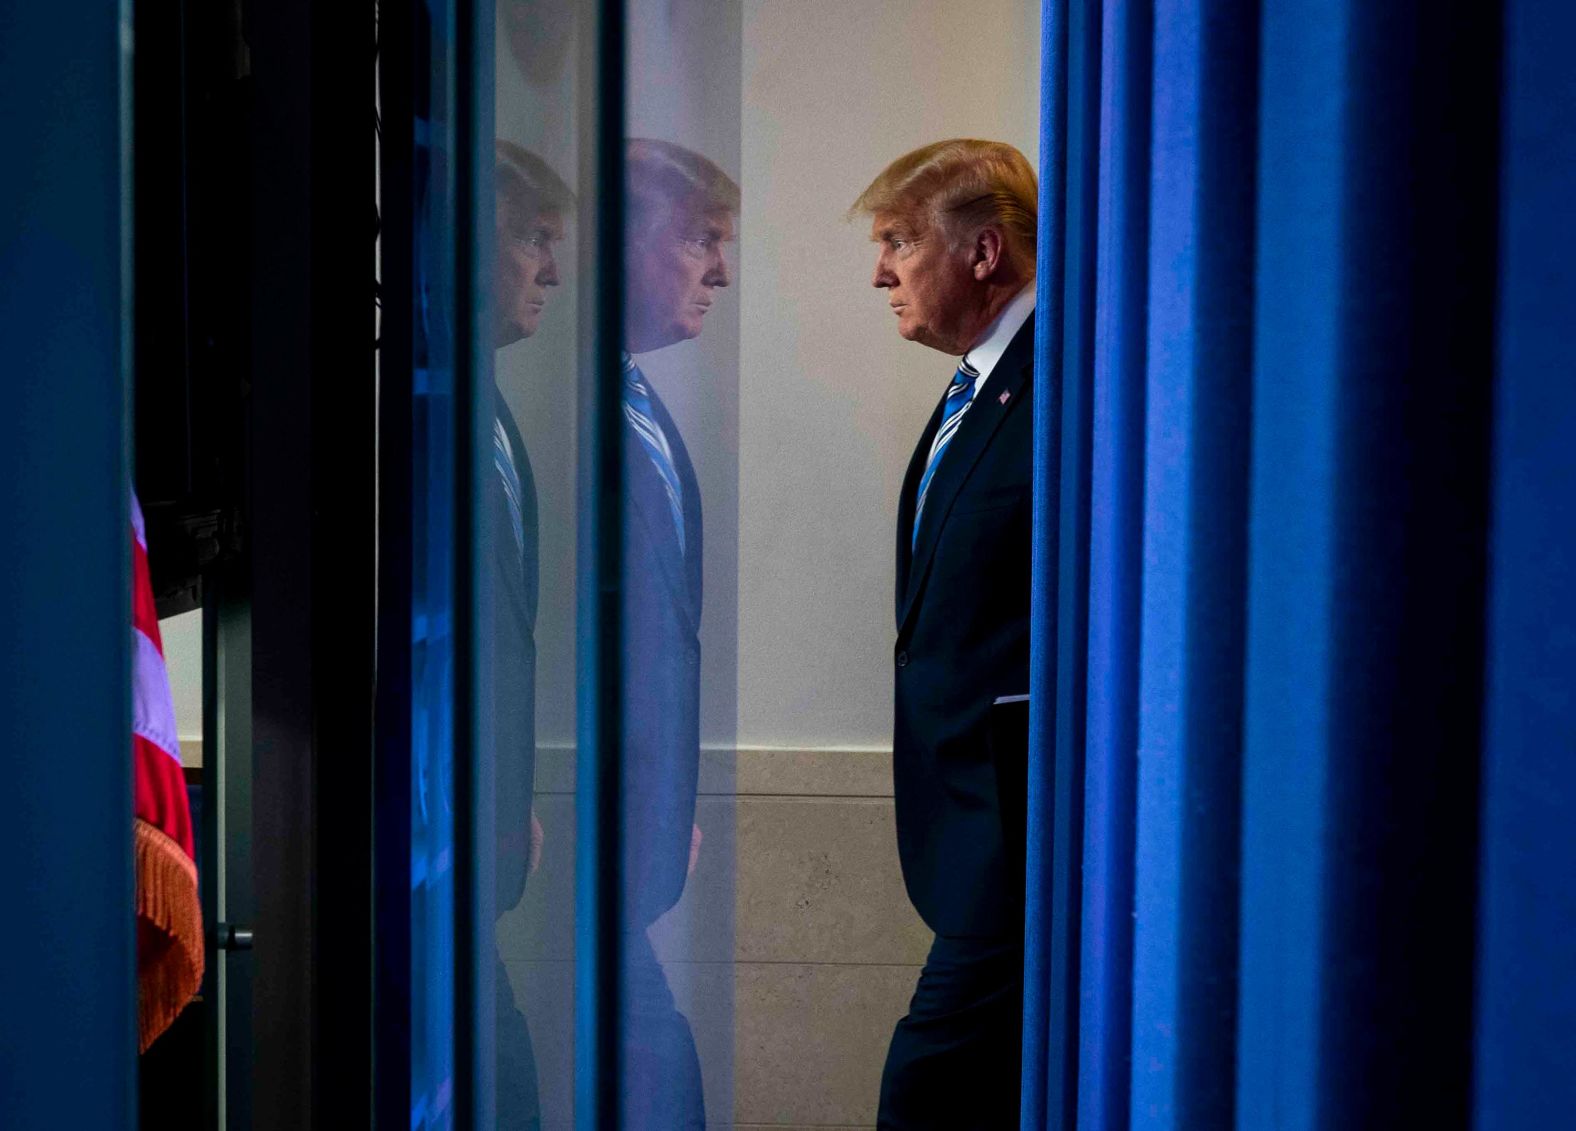 Trump arrives for a briefing on March 23.